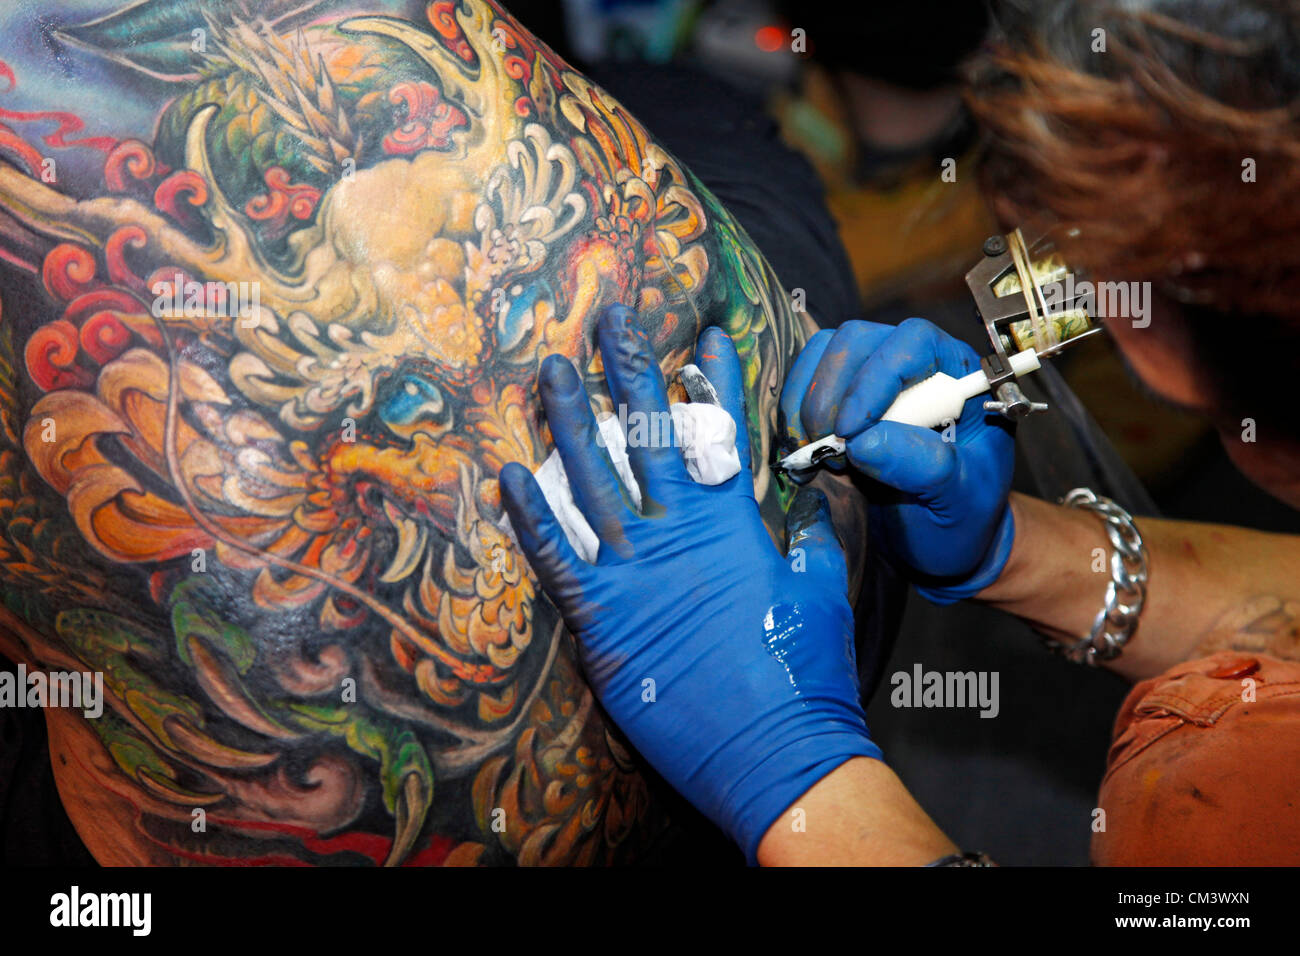 London, UK. 28th September 2012. Tattooist Gao Bin of Lion King Tattoo from Taiwan tattooing at the London Tattoo Convention 2012 Stock Photo